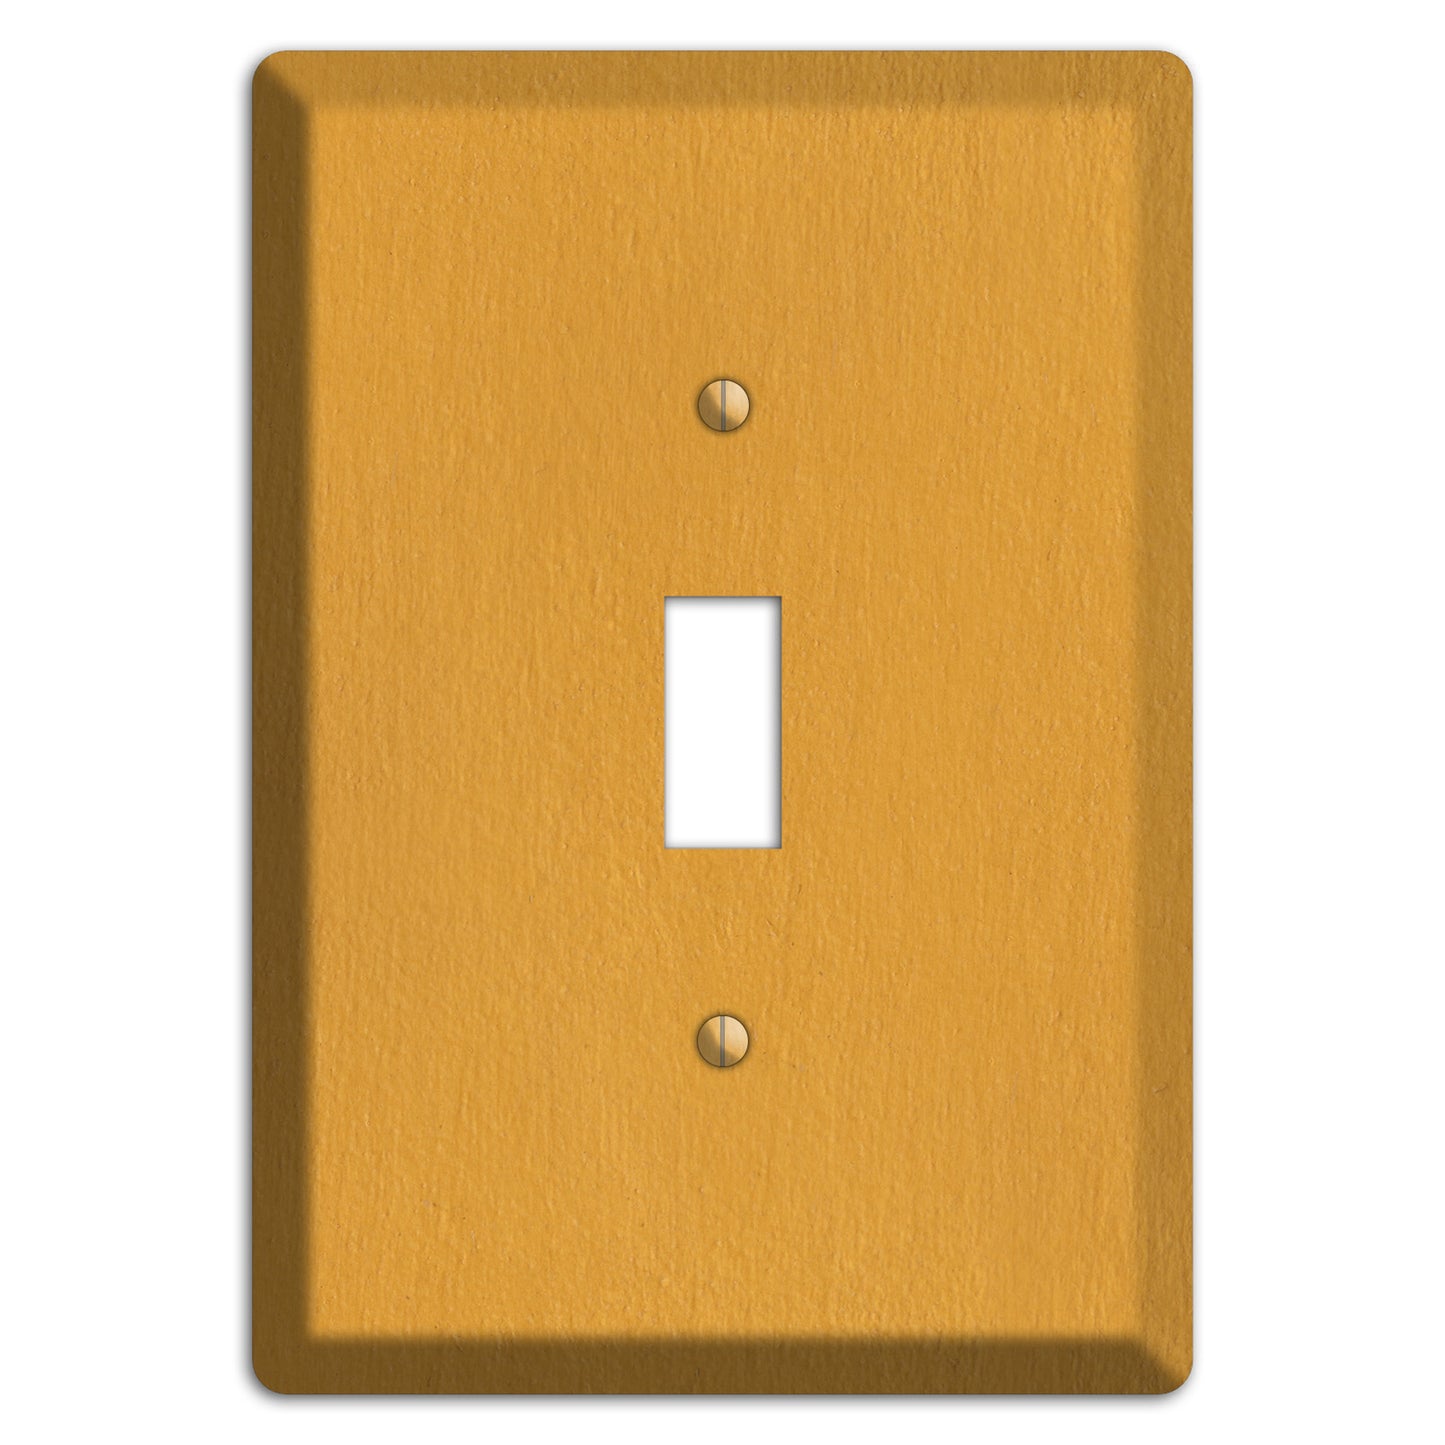 Stucco Yellow Cover Plates